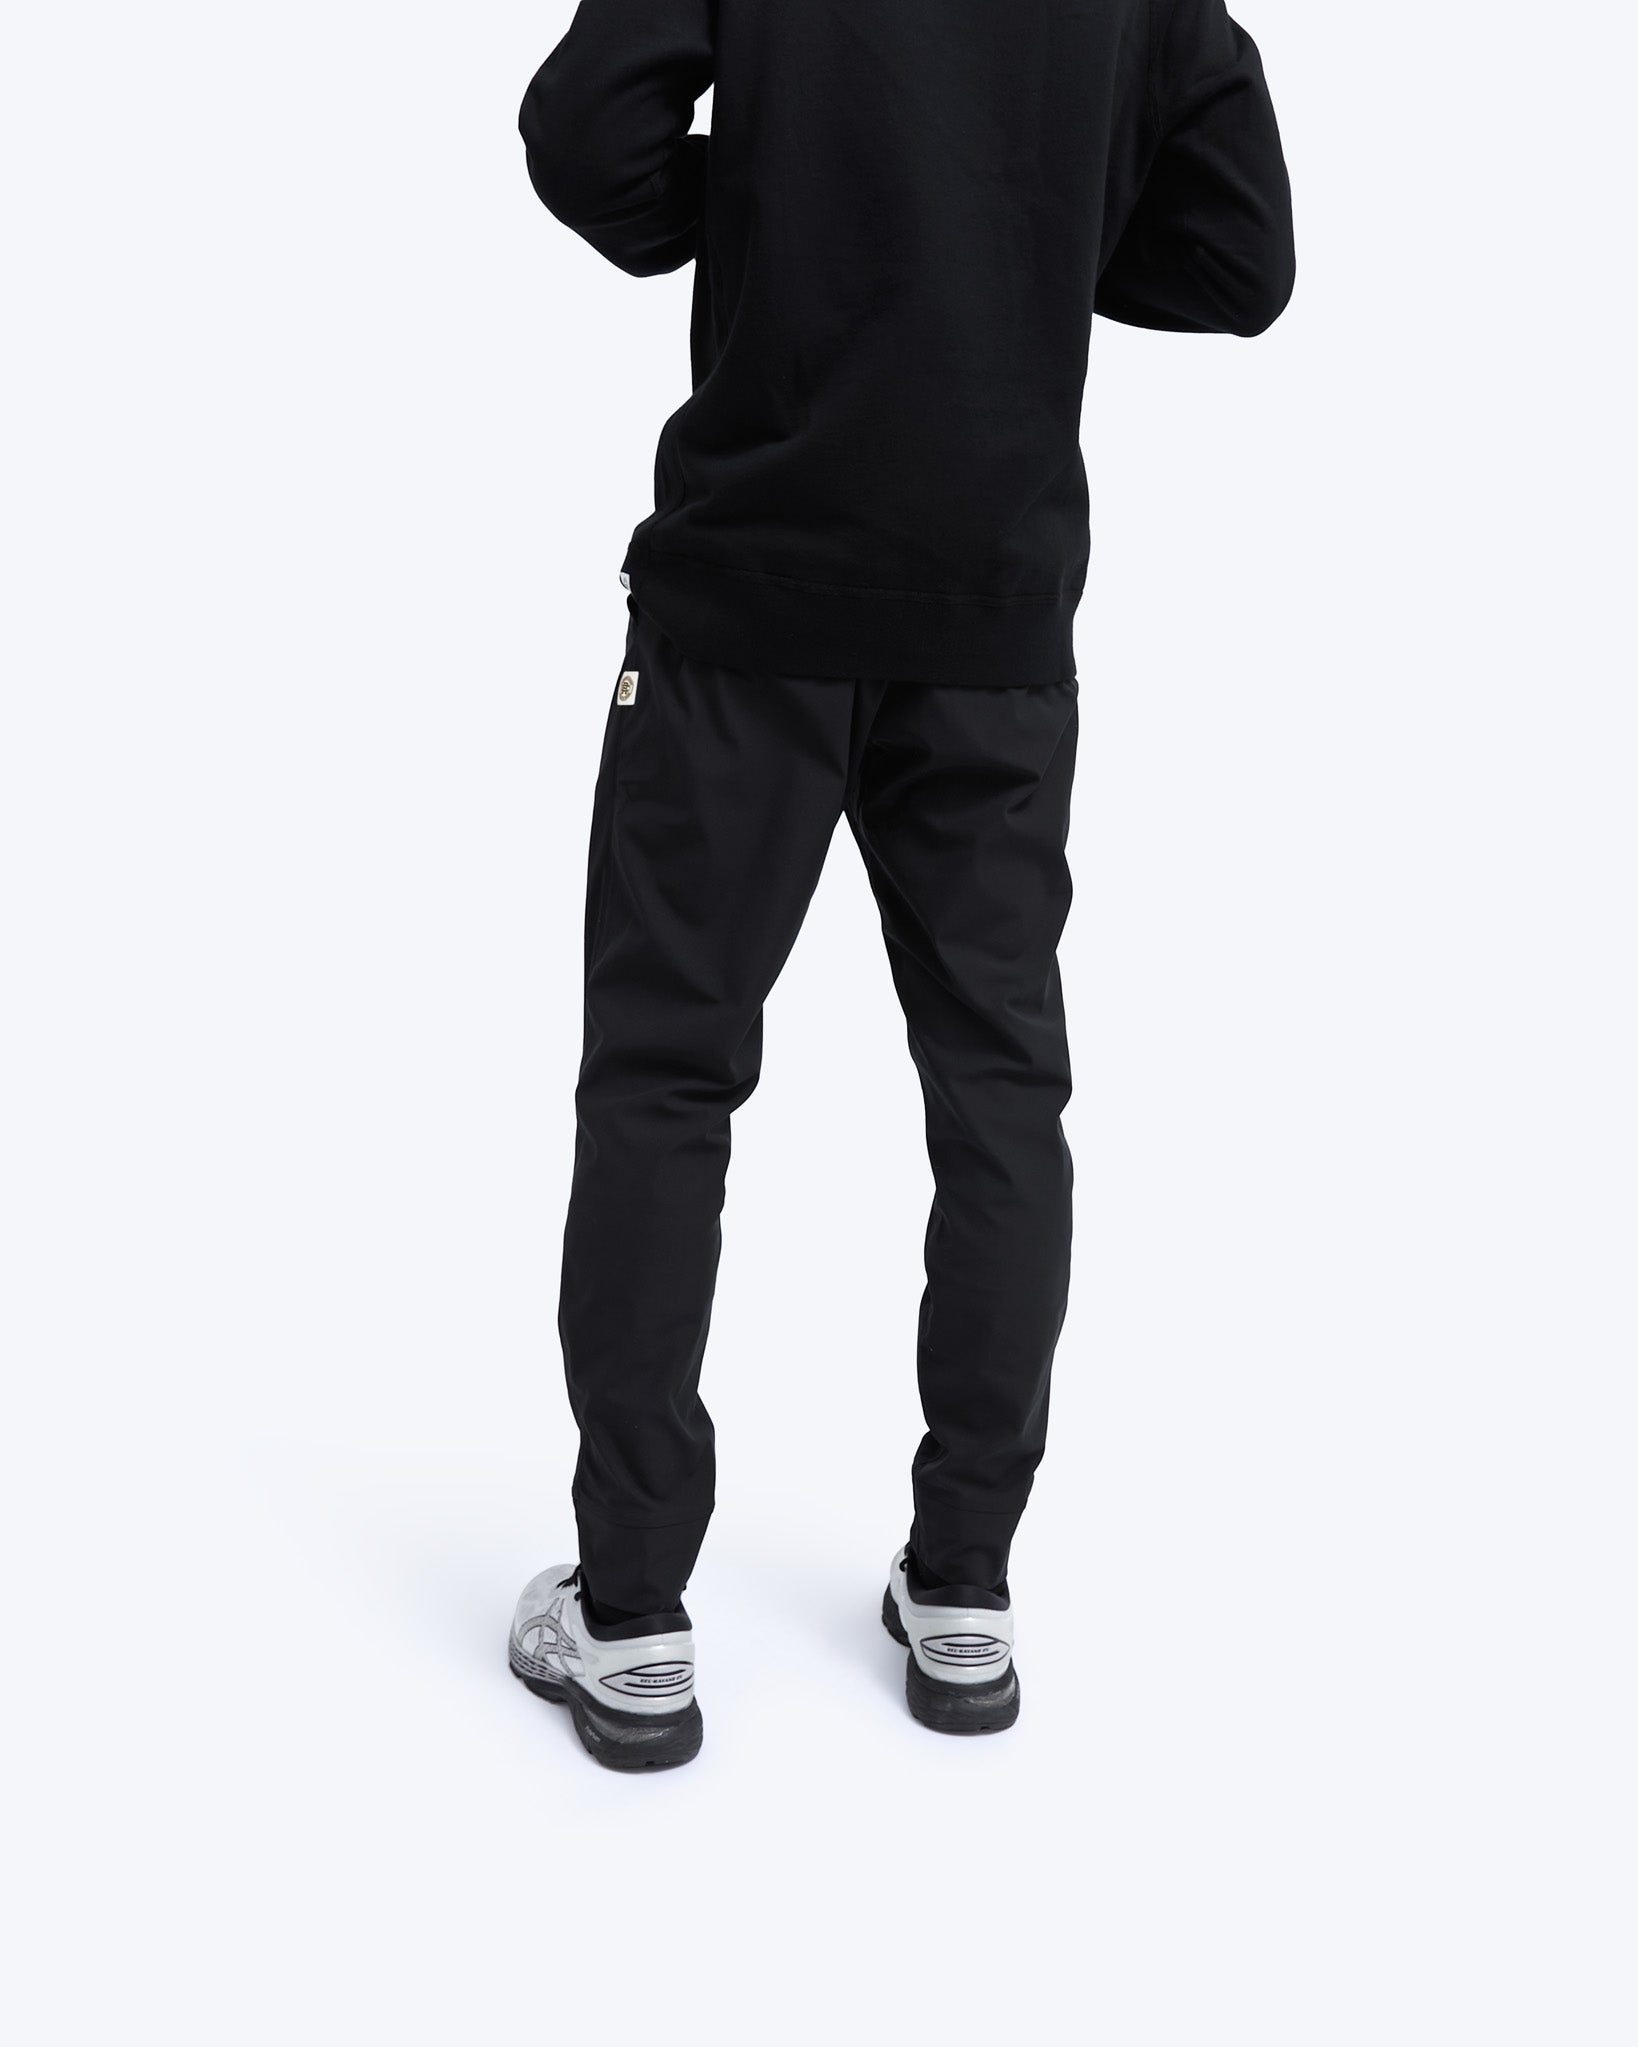 Reigning Champ】Coach's Jogger | Reigning Champ JP